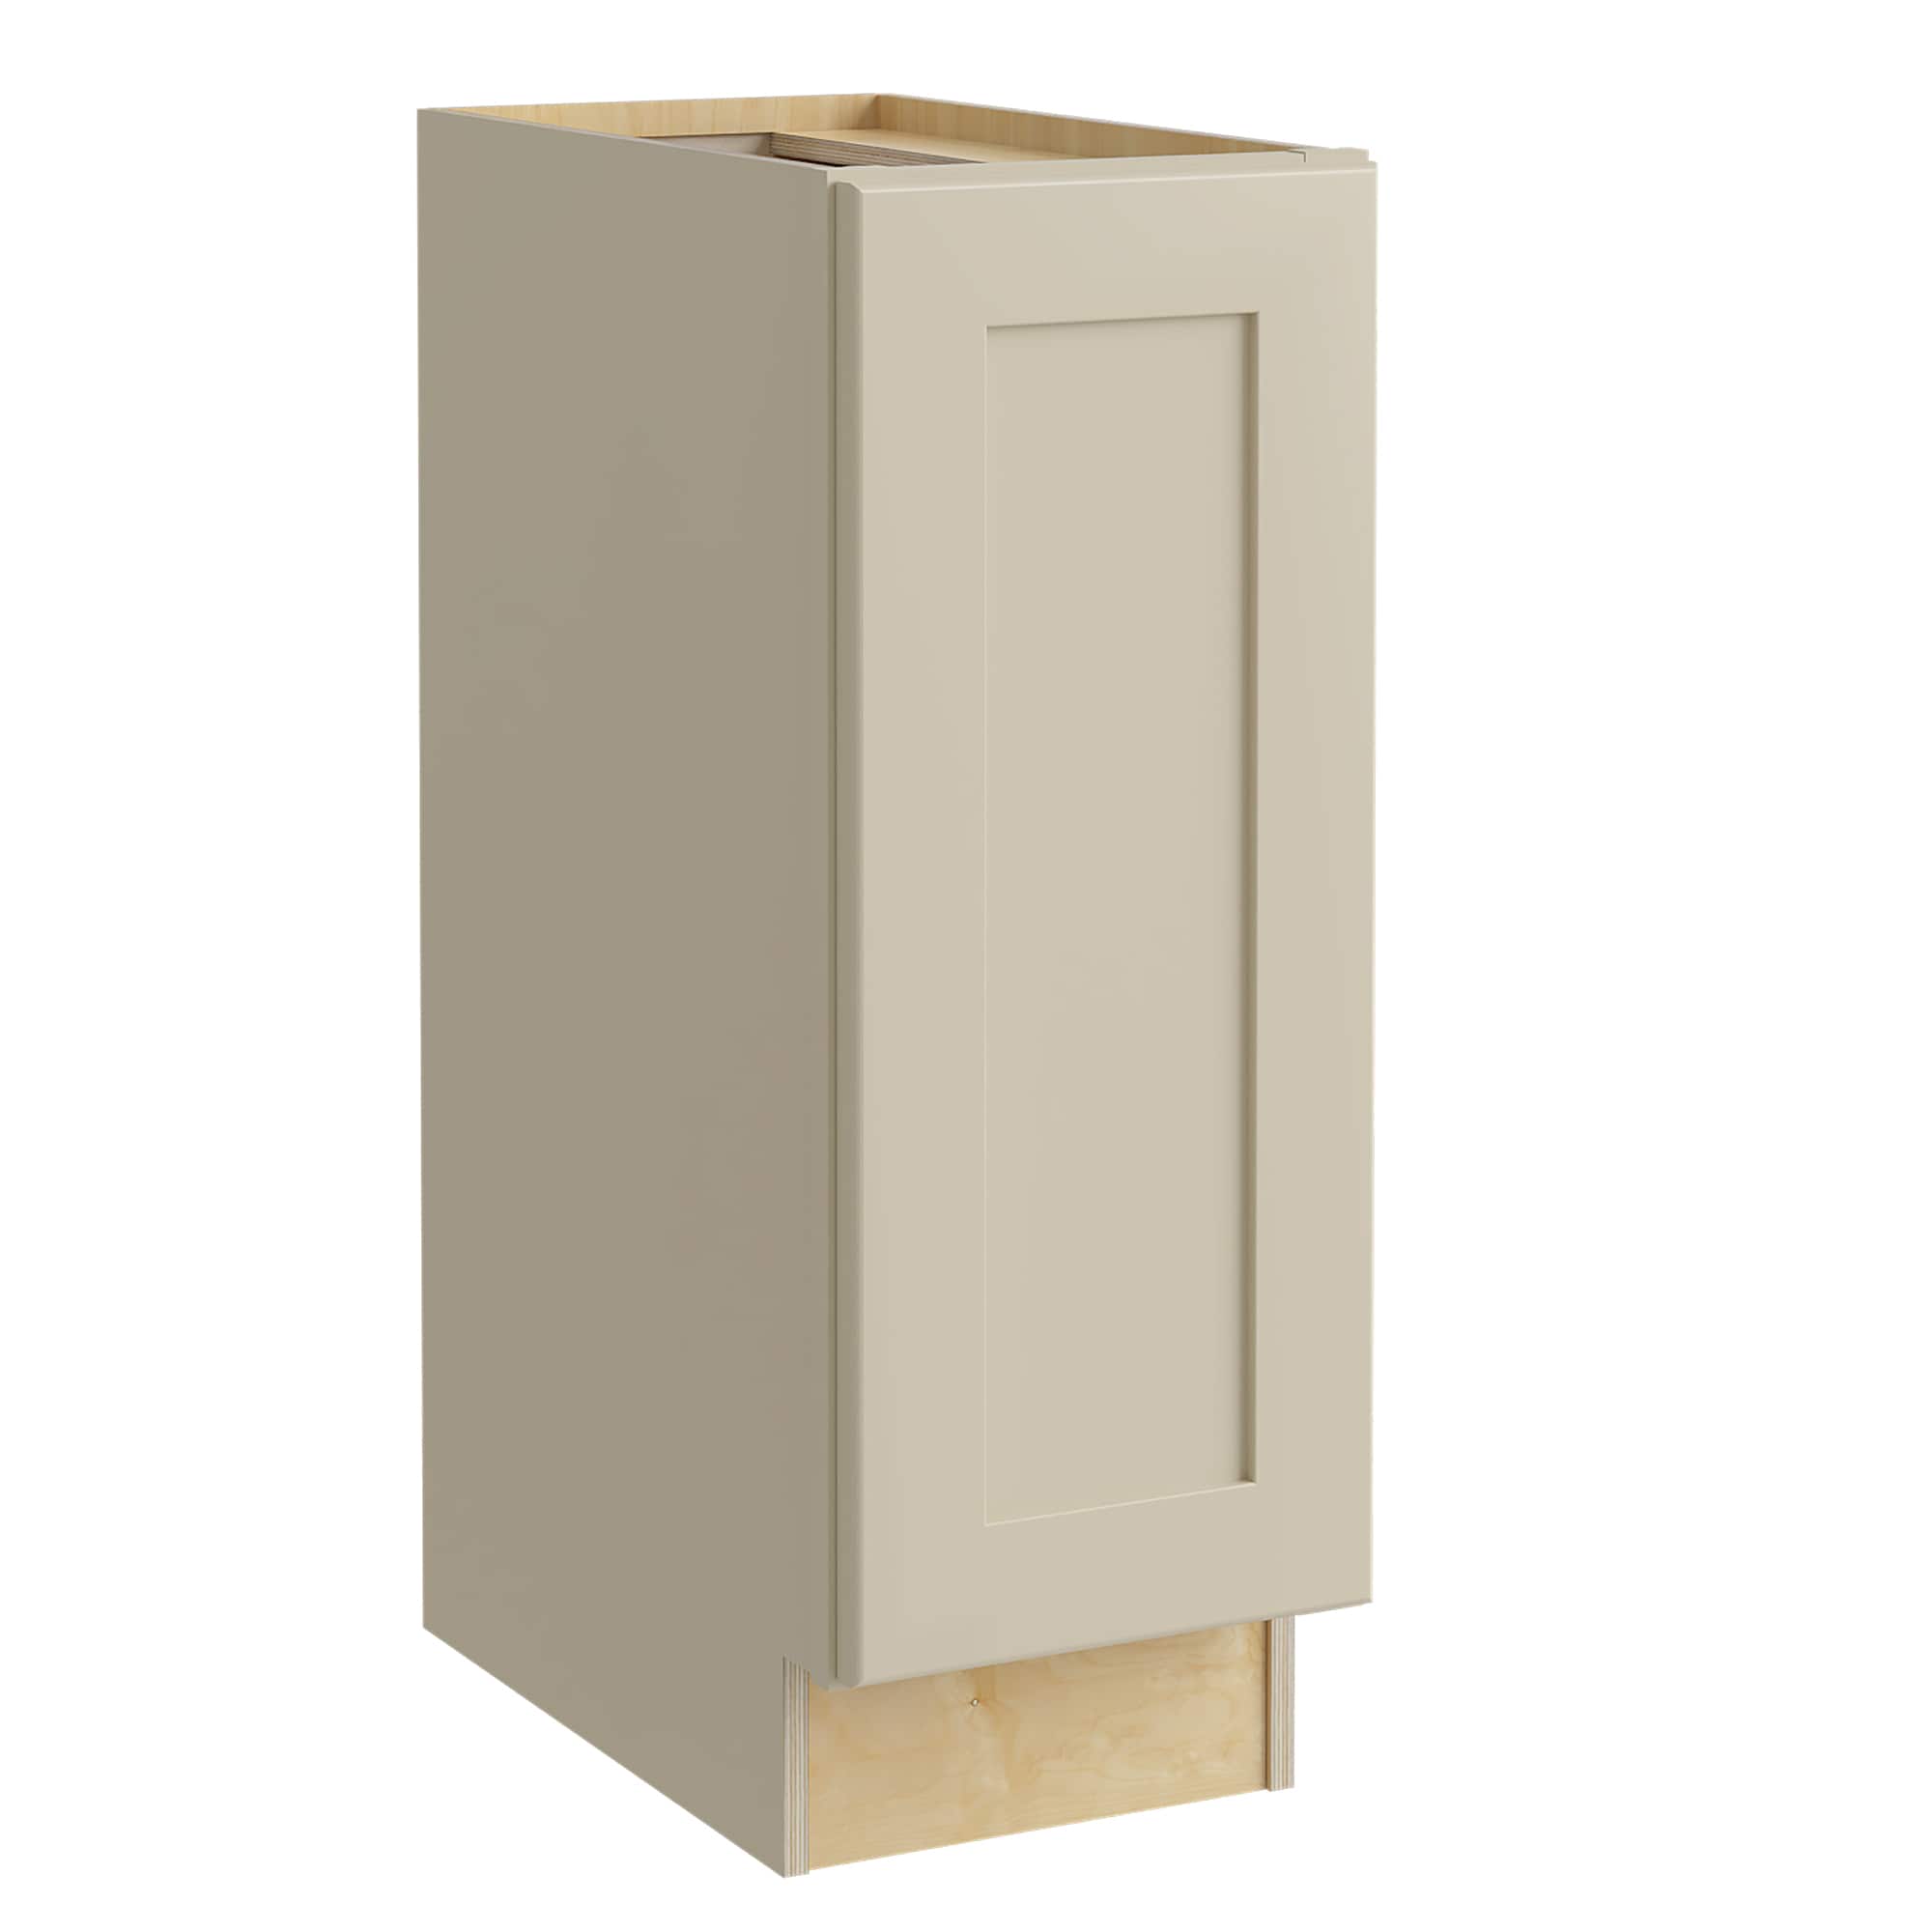 Luxxe Cabinetry 21-in W x 34.5-in H x 21-in D Norfolk Blended Cream Painted Door Base Fully Assembled Semi-custom Cabinet in Off-White | VB2121FHR-NBC